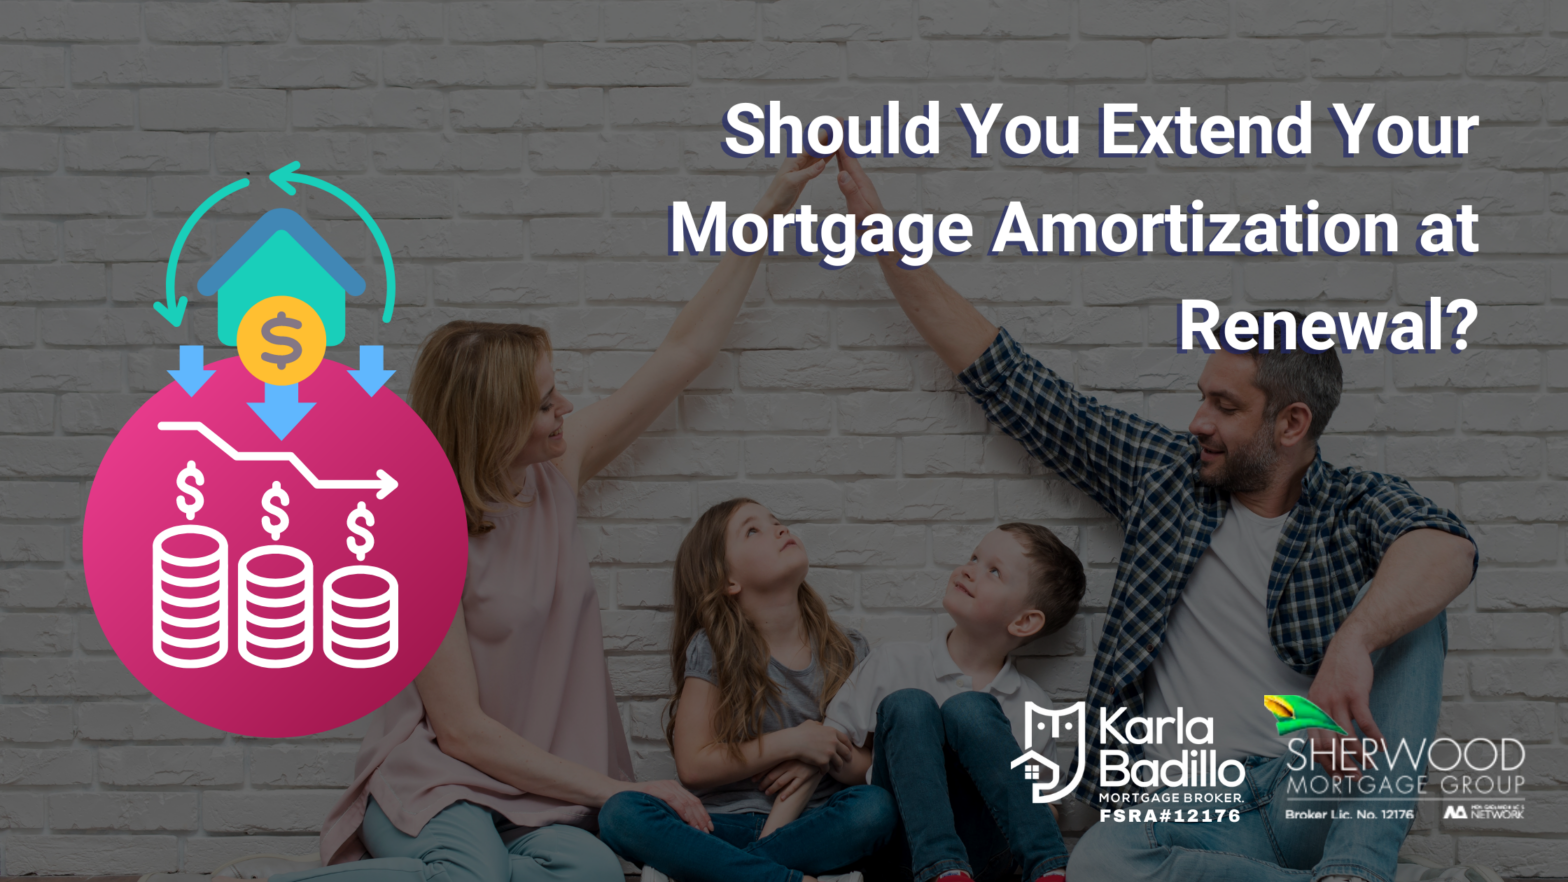 Should You Extend Your Mortgage Amortization at Renewal?